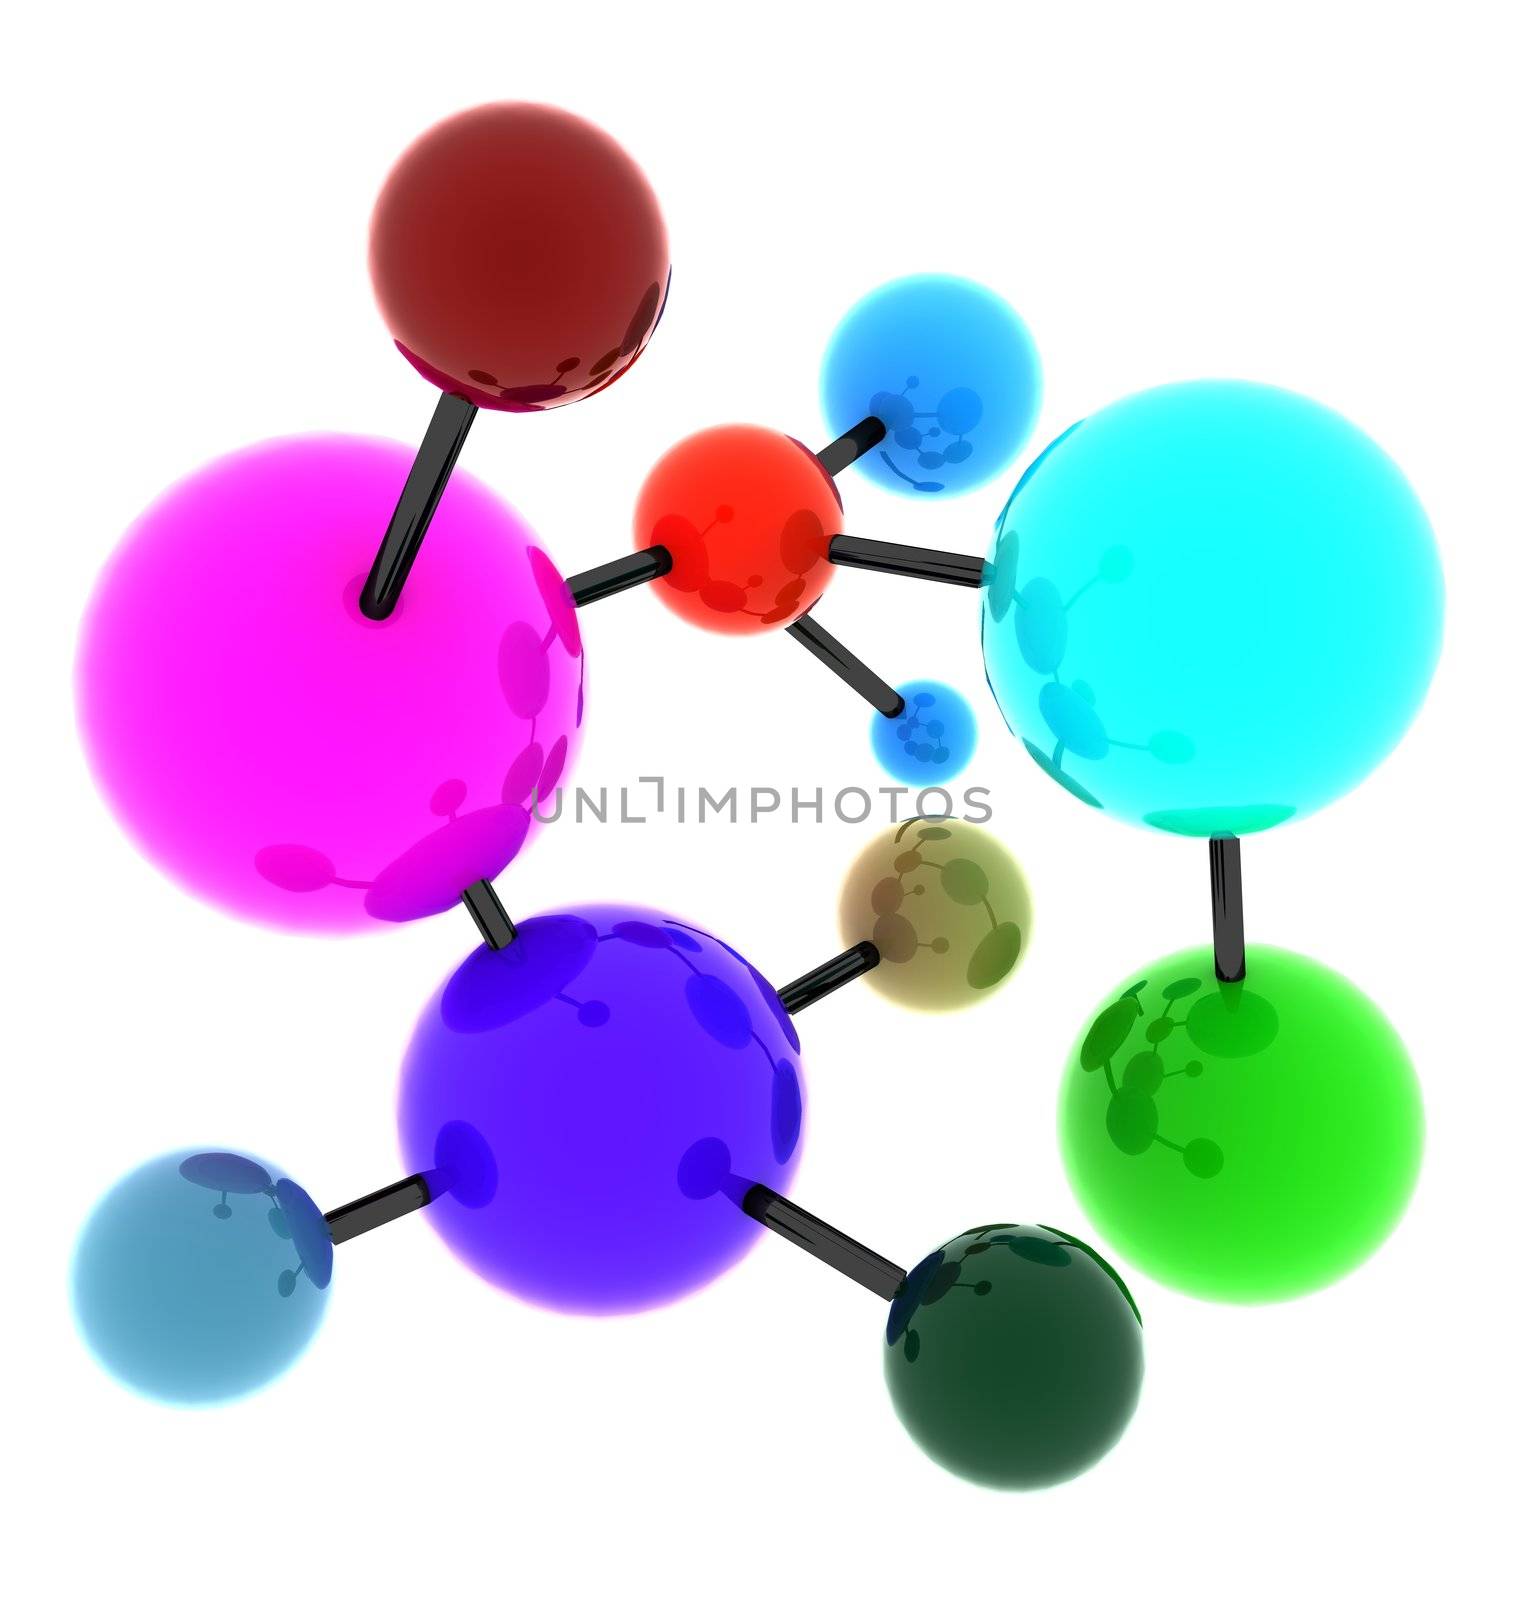 Concept of abstract molecular structure portrayed by slightly reflective spheres in bright colors interconnected by black cylinders forming linkage. Scene rendered vertically and isolated on white background.